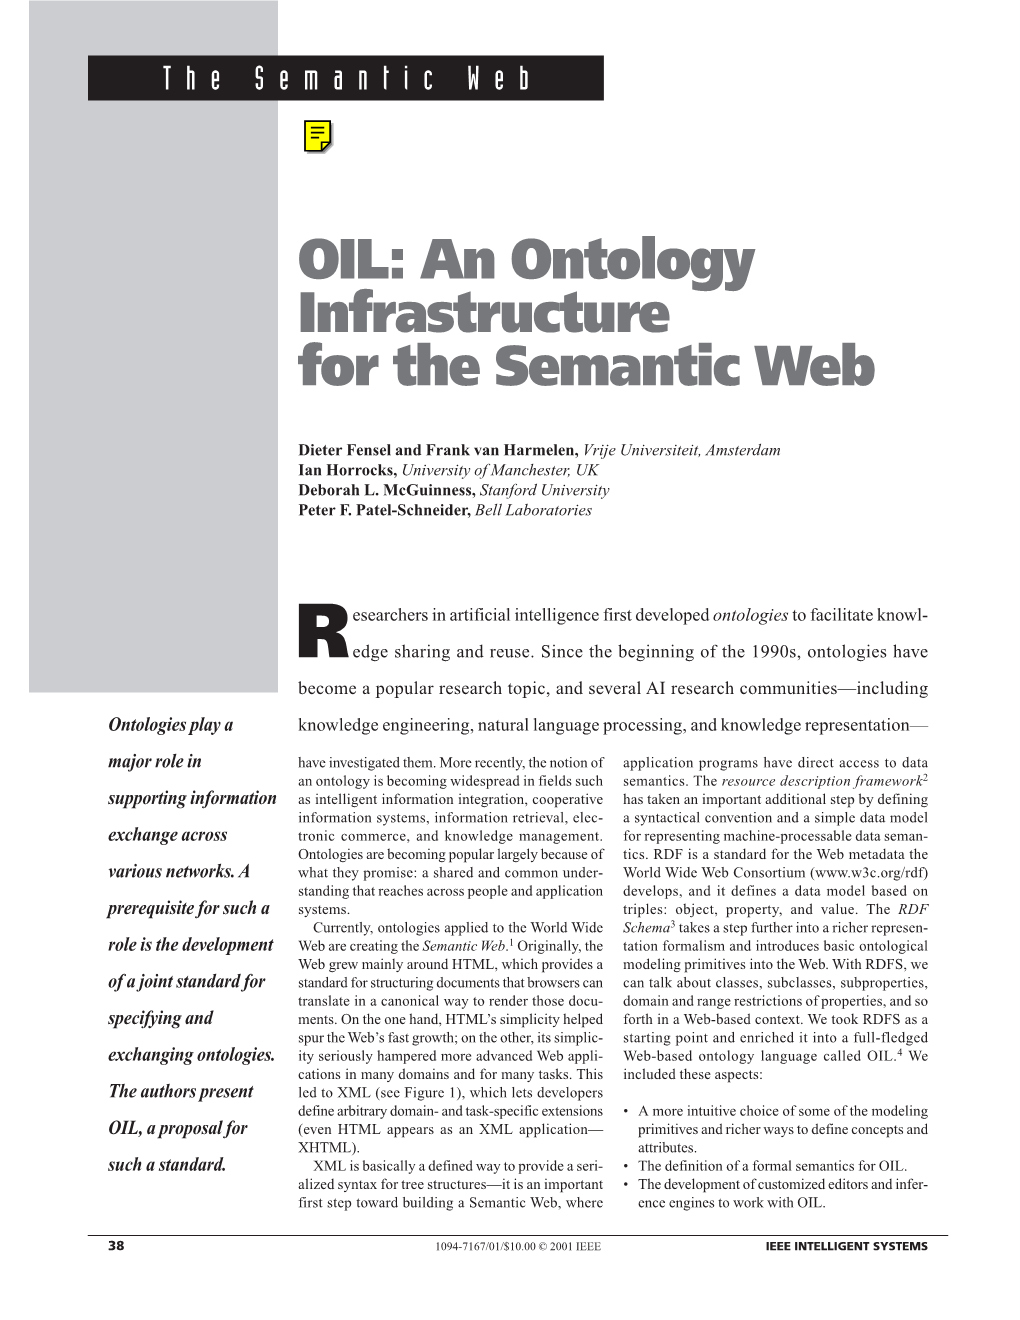 OIL: an Ontology Infrastructure for the Semantic Web